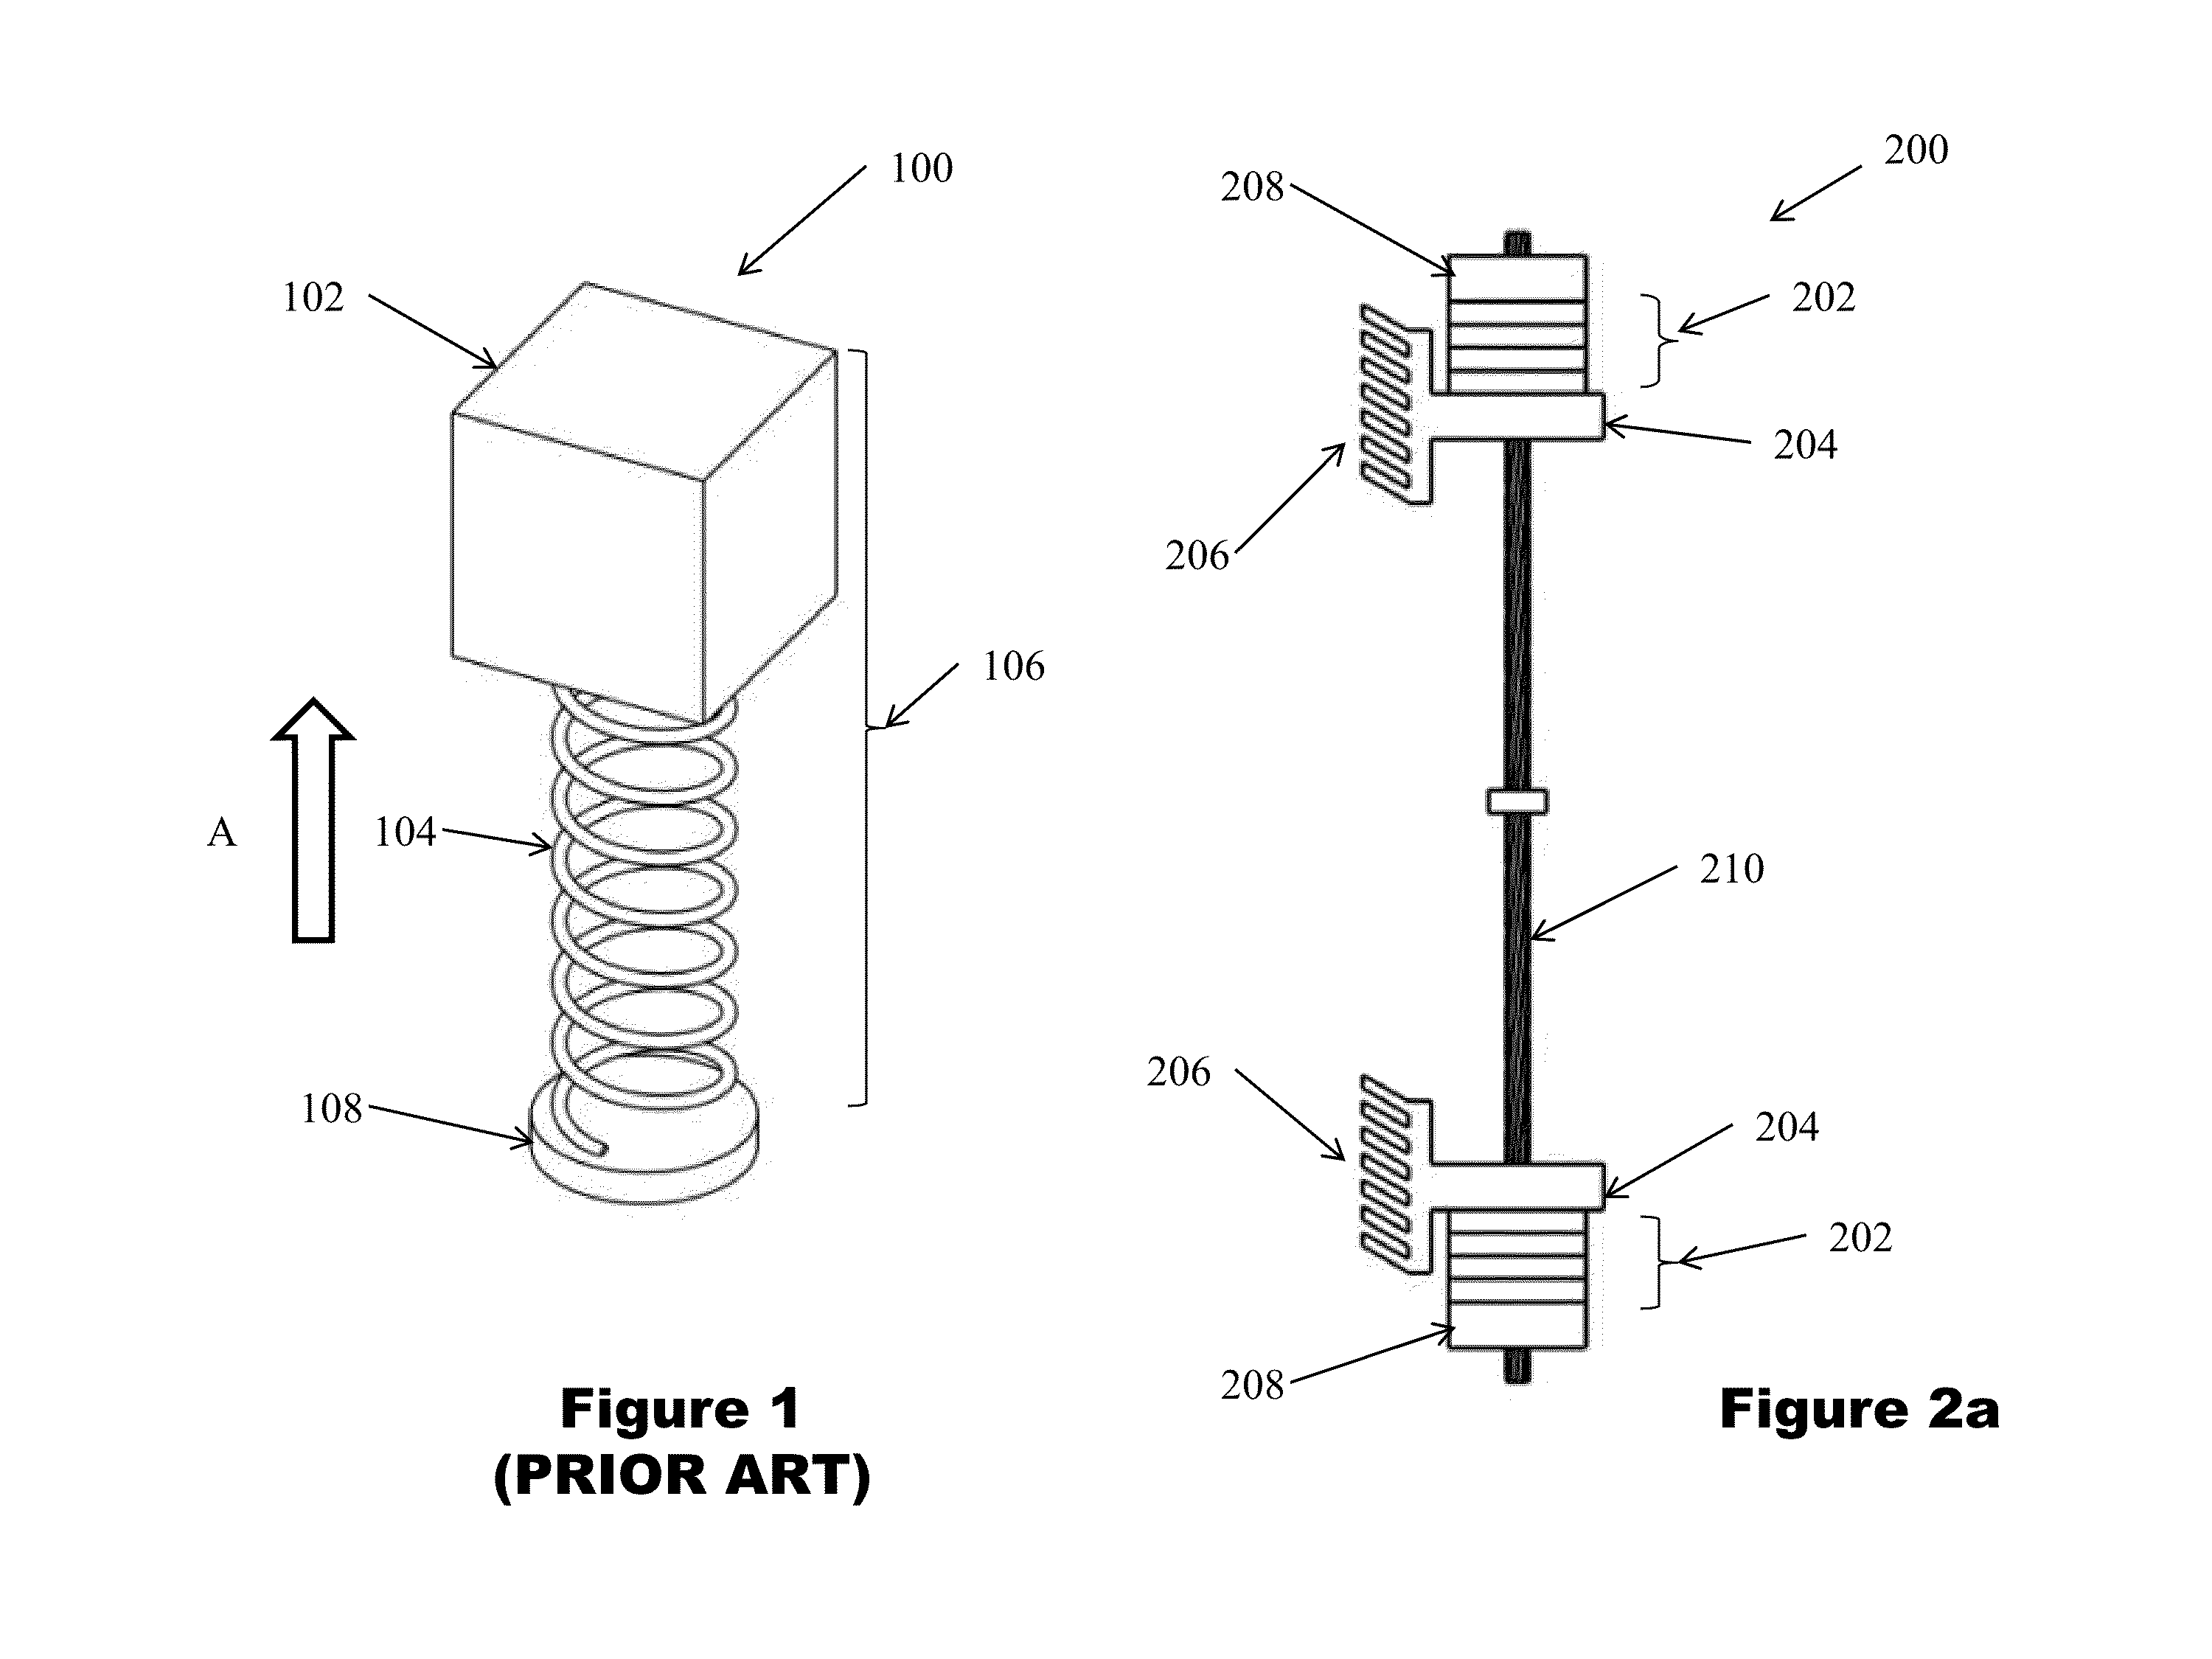 Energy Harvesting From Input Impulse With Motion Doubling Mechanism For Generating Power From Mortar Tube Firing Impulses and Other Inputs